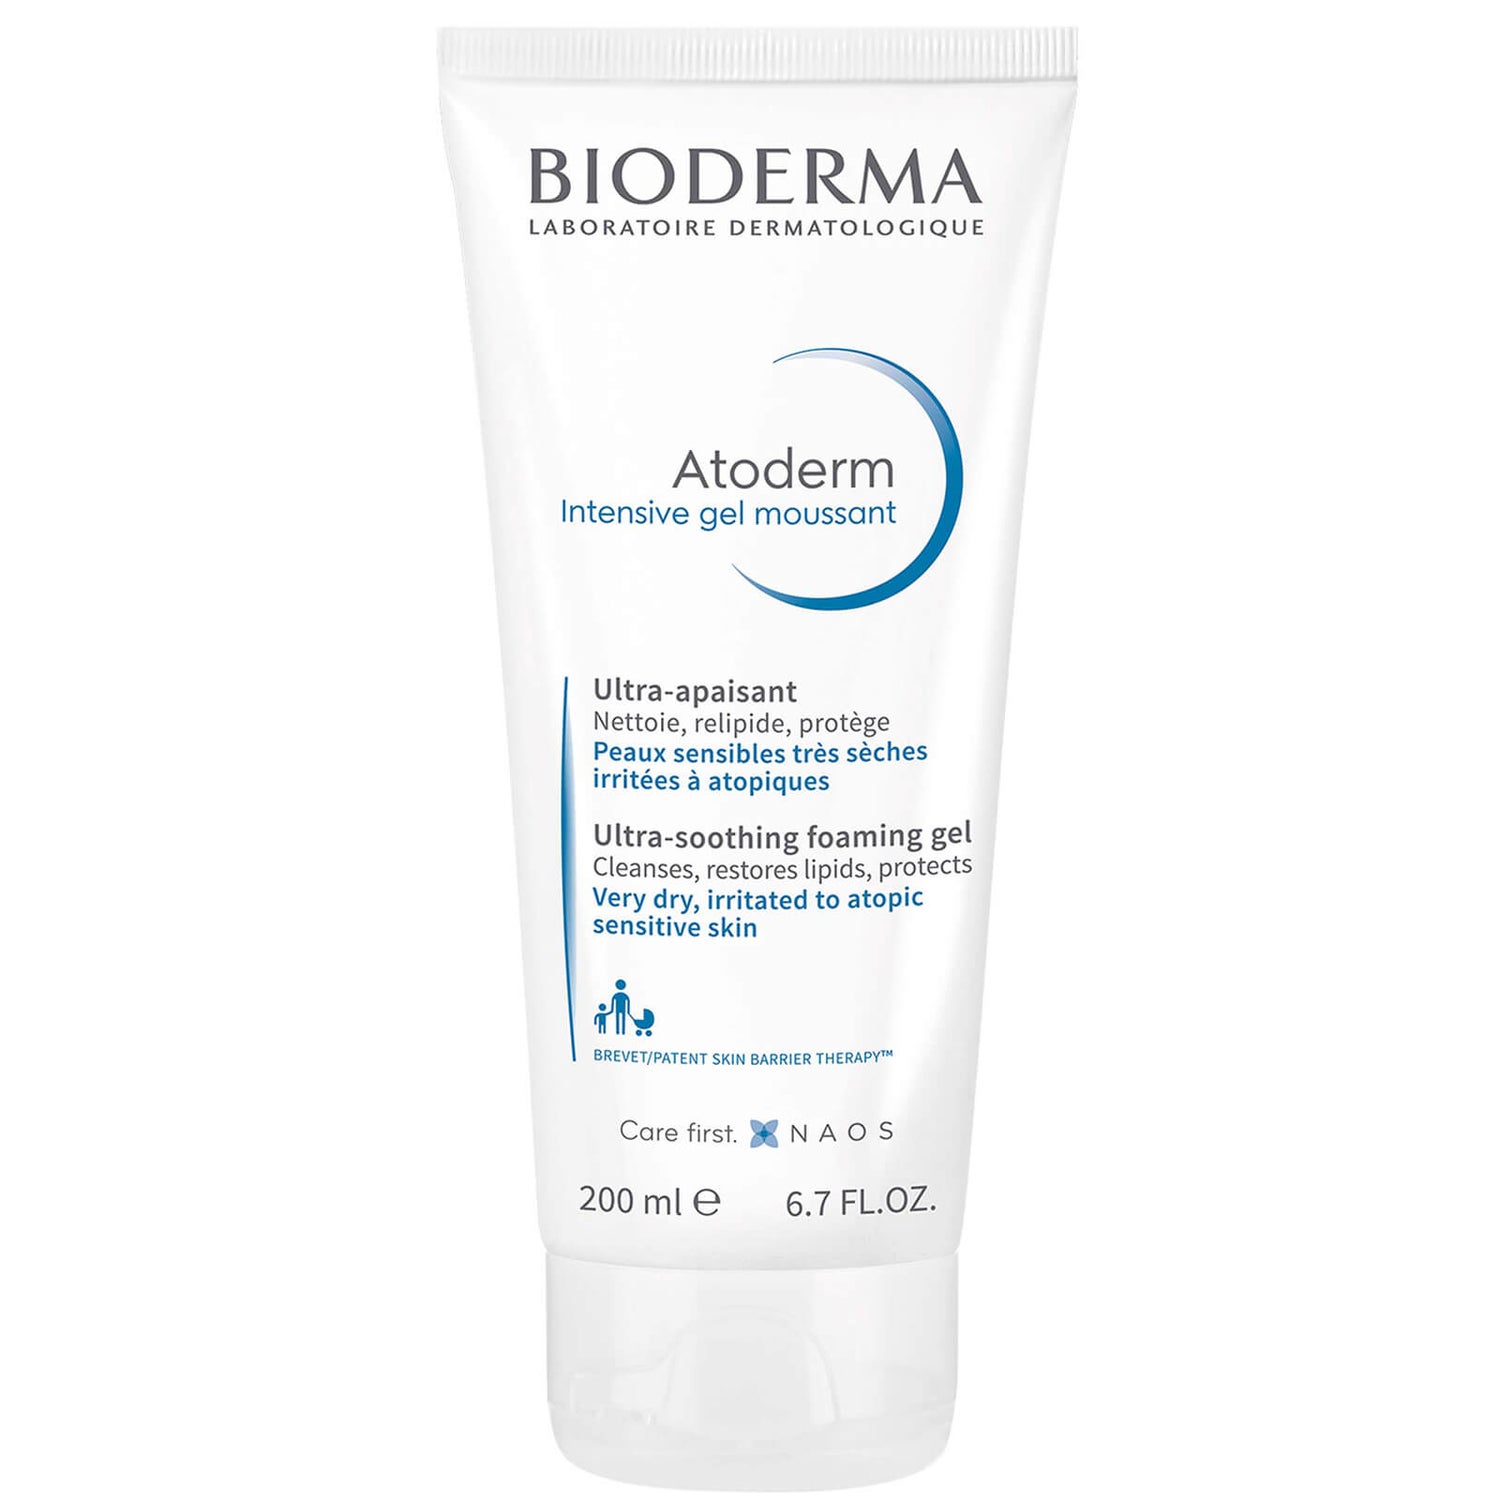 BIODERMA Atoderm Intensive Gel Moussant Hydrating Foaming Body Wash for Dry Skin 200ml